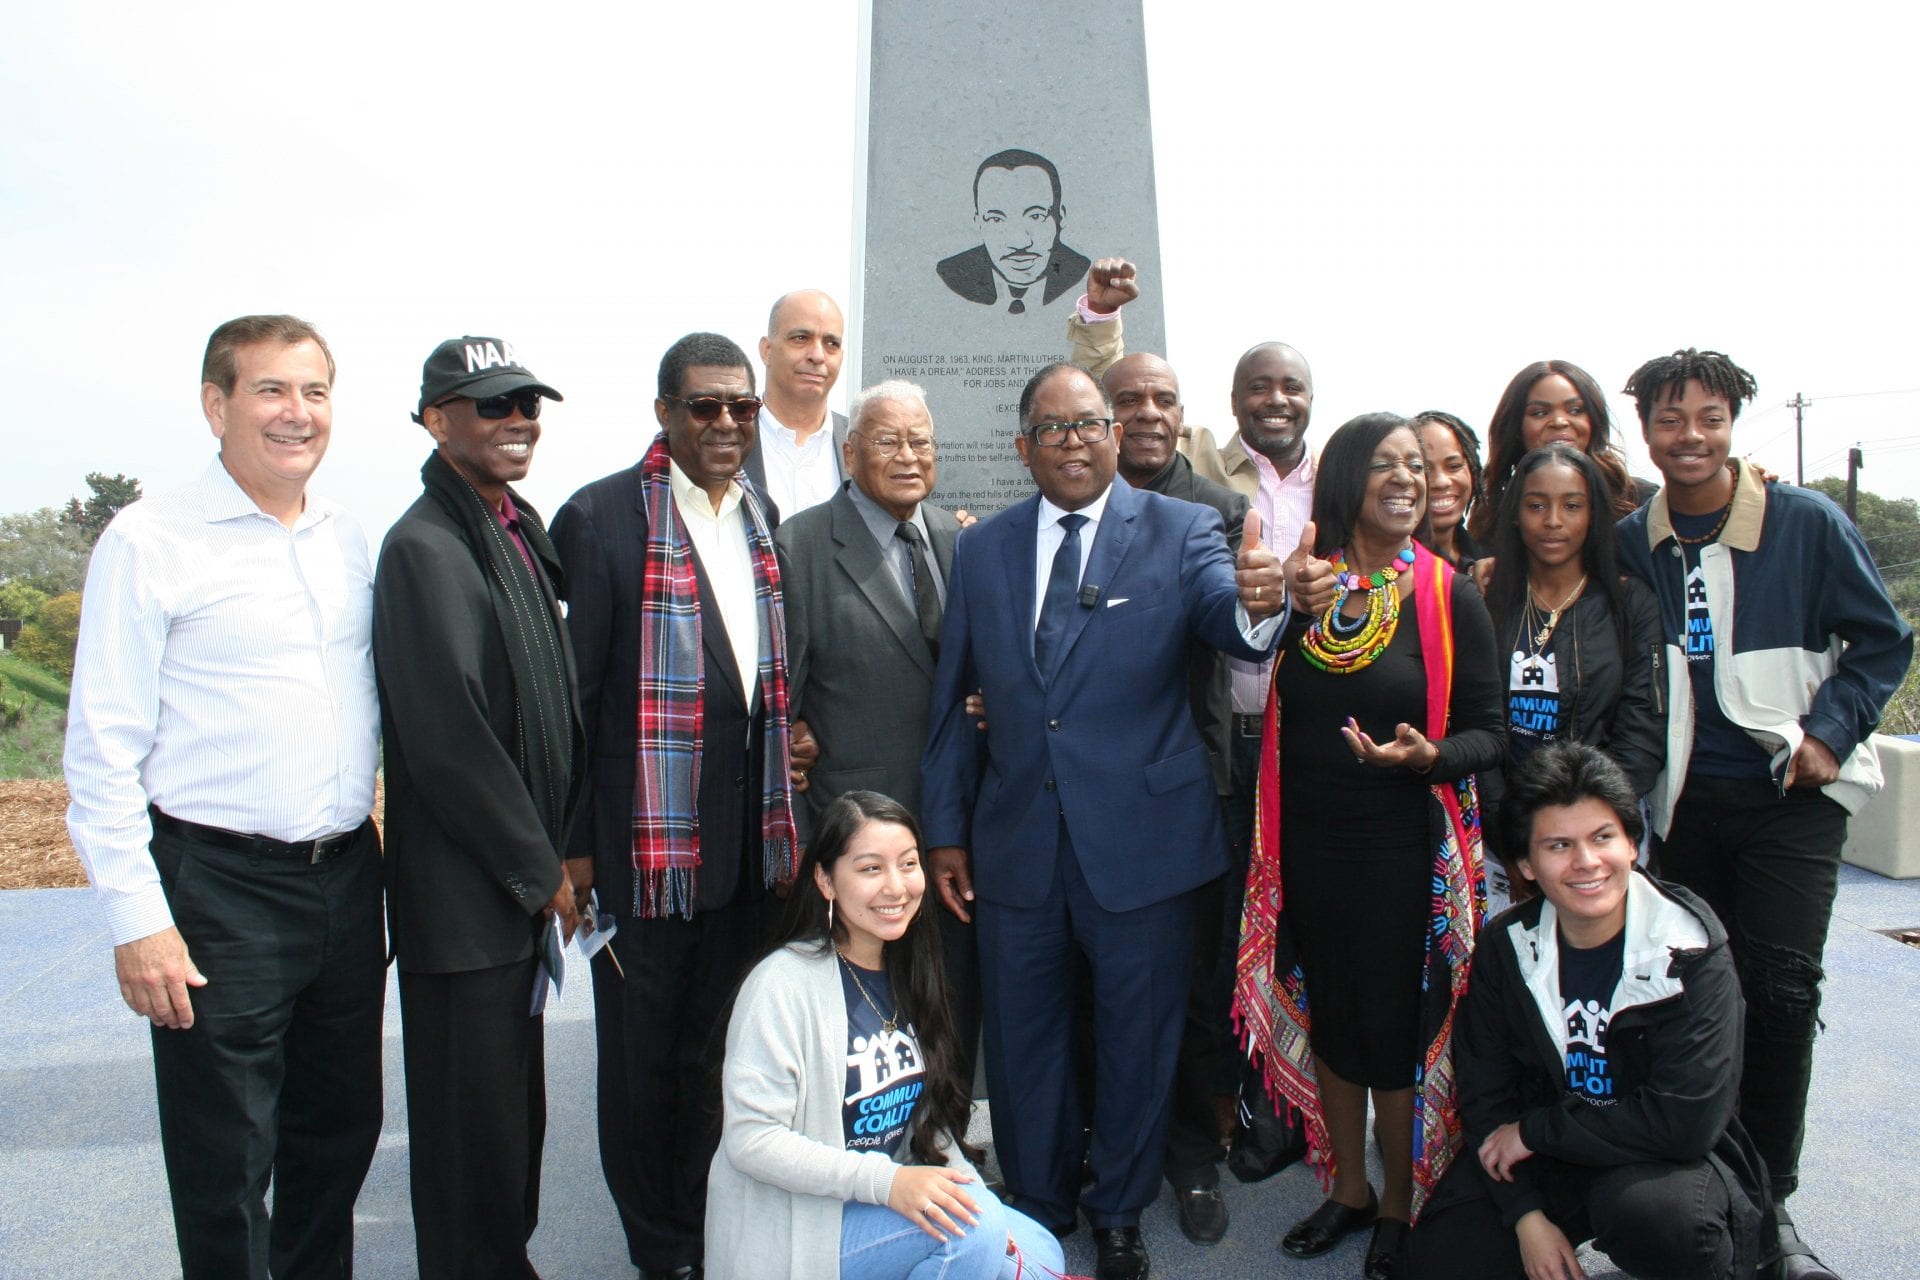 A picture of the MLK memorial.